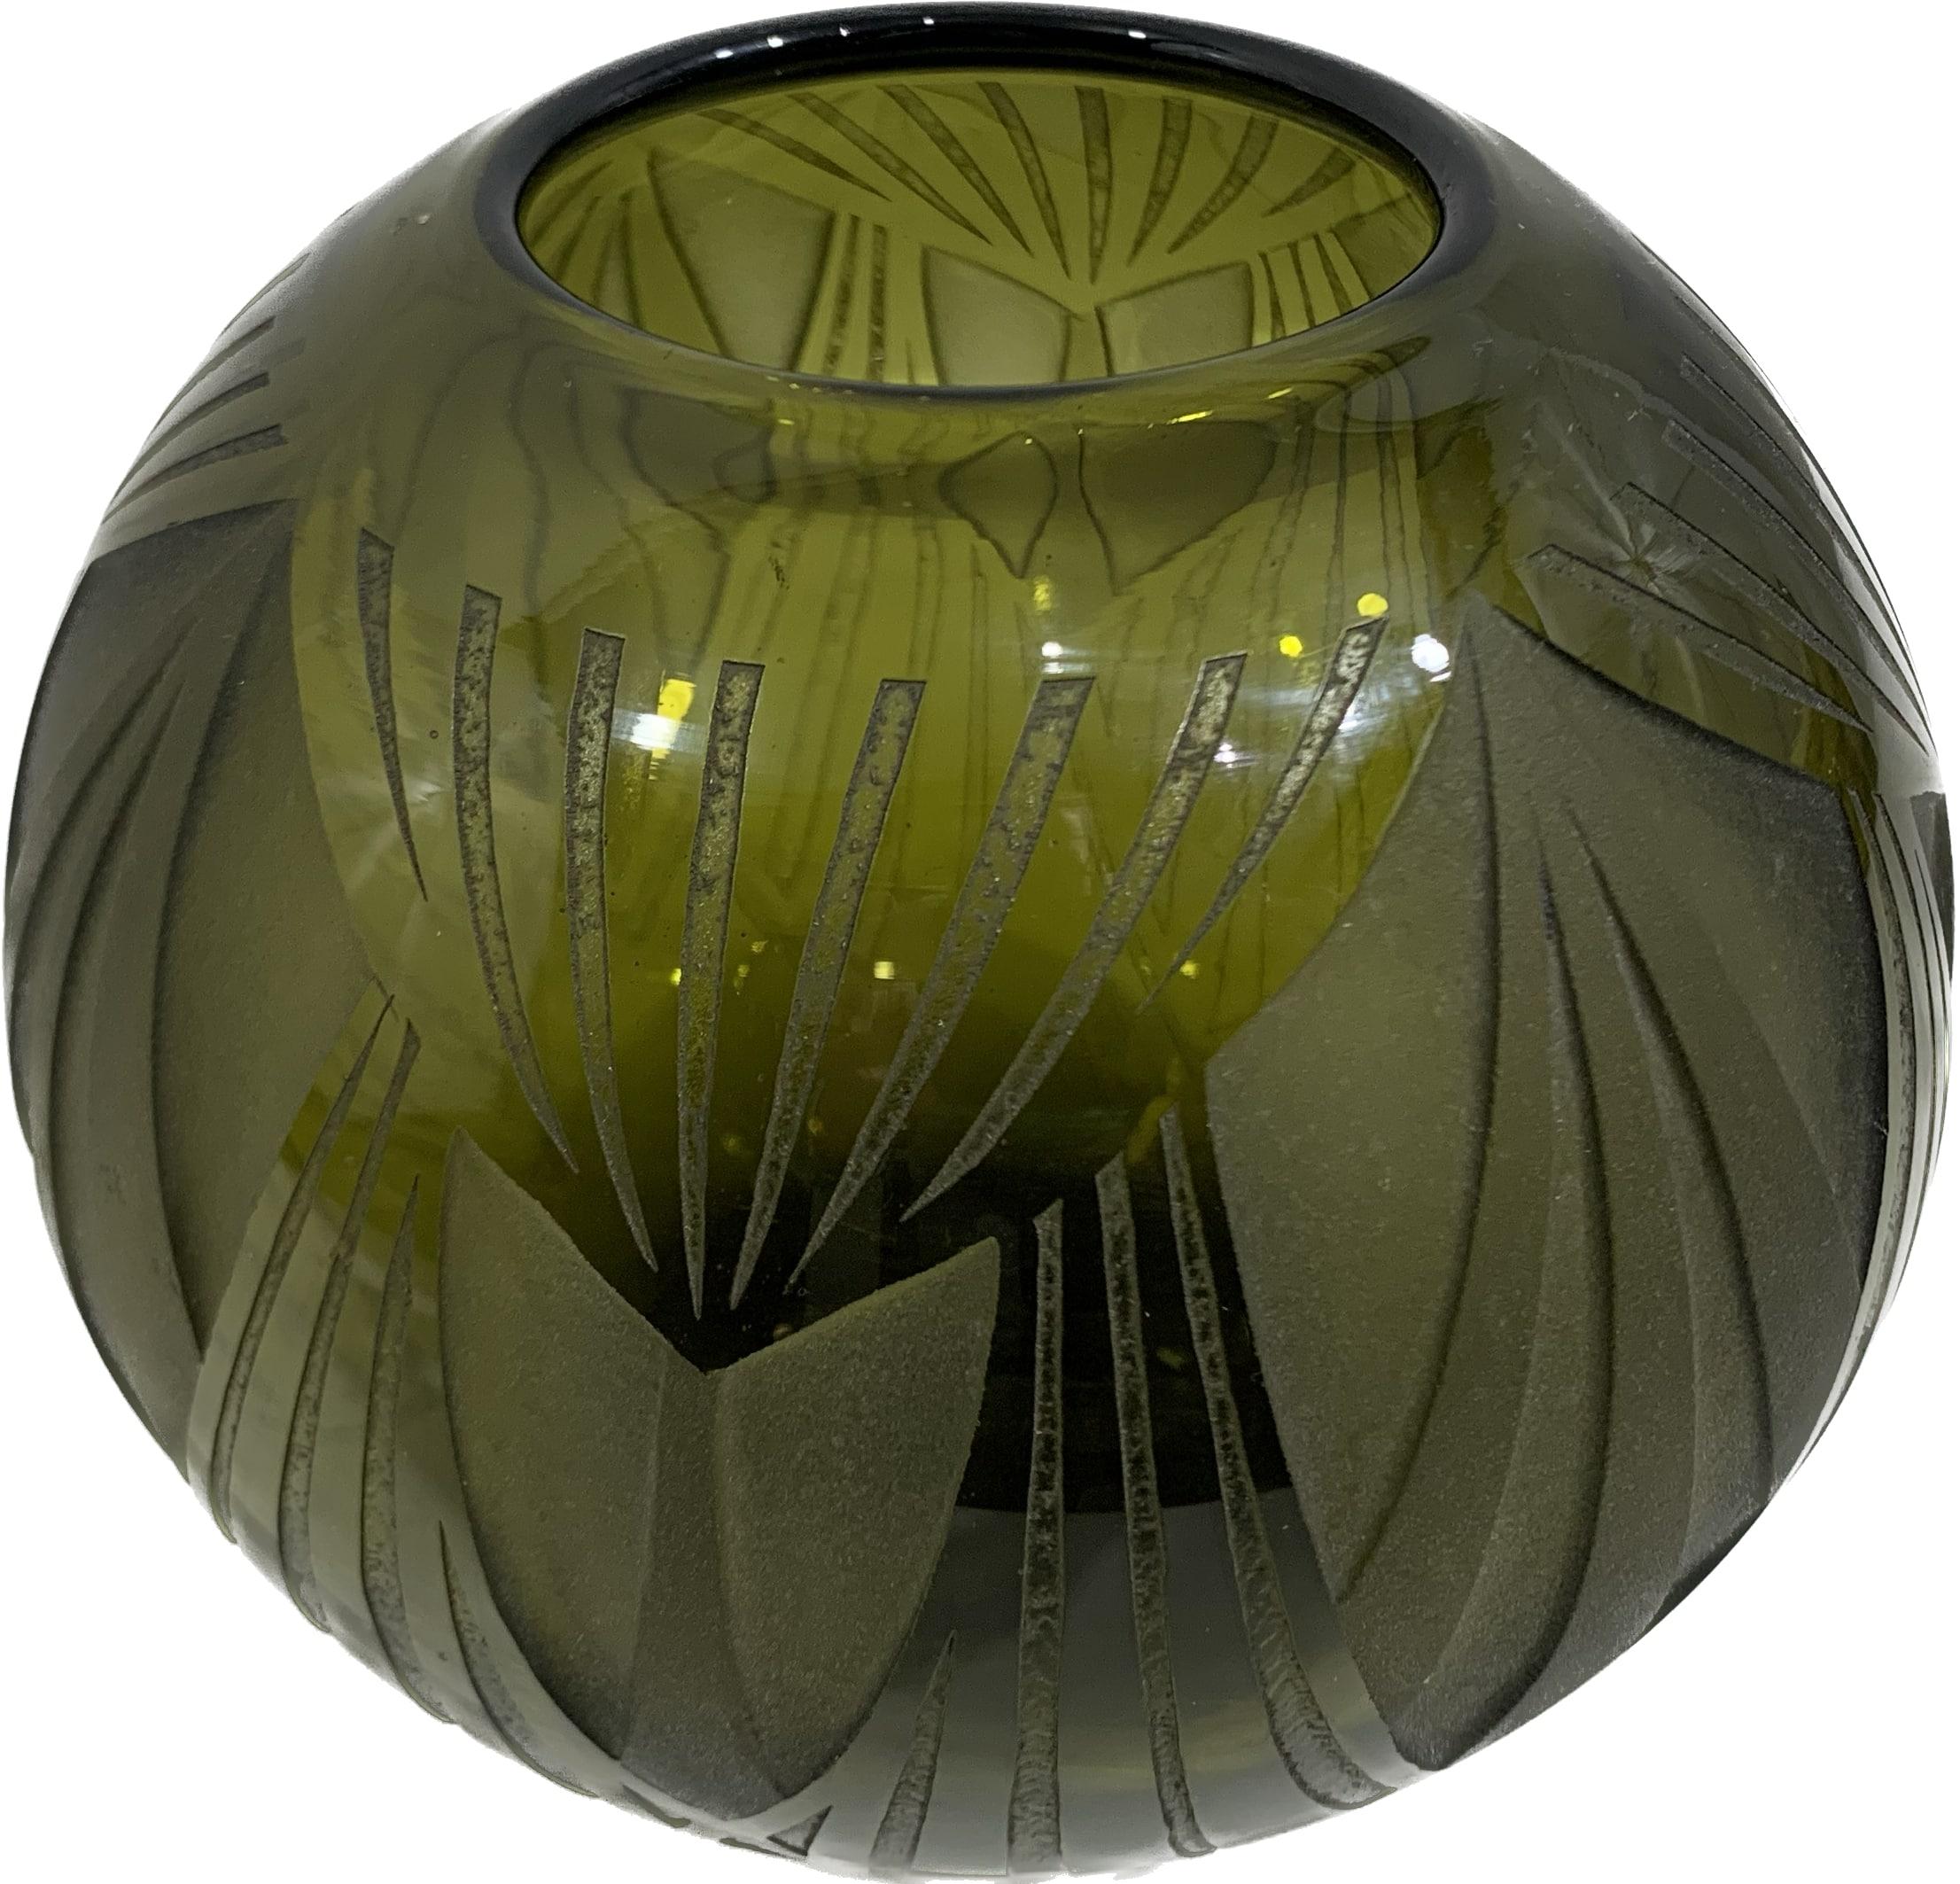 A stunning mid 20th century glass vase signed L Gras. It is of french origin from the 1930’s. The vase is clear-polished and sandblasted, thus showcasing a geometric figure typical of the Art-Déco movement. The blasting was probably done with a